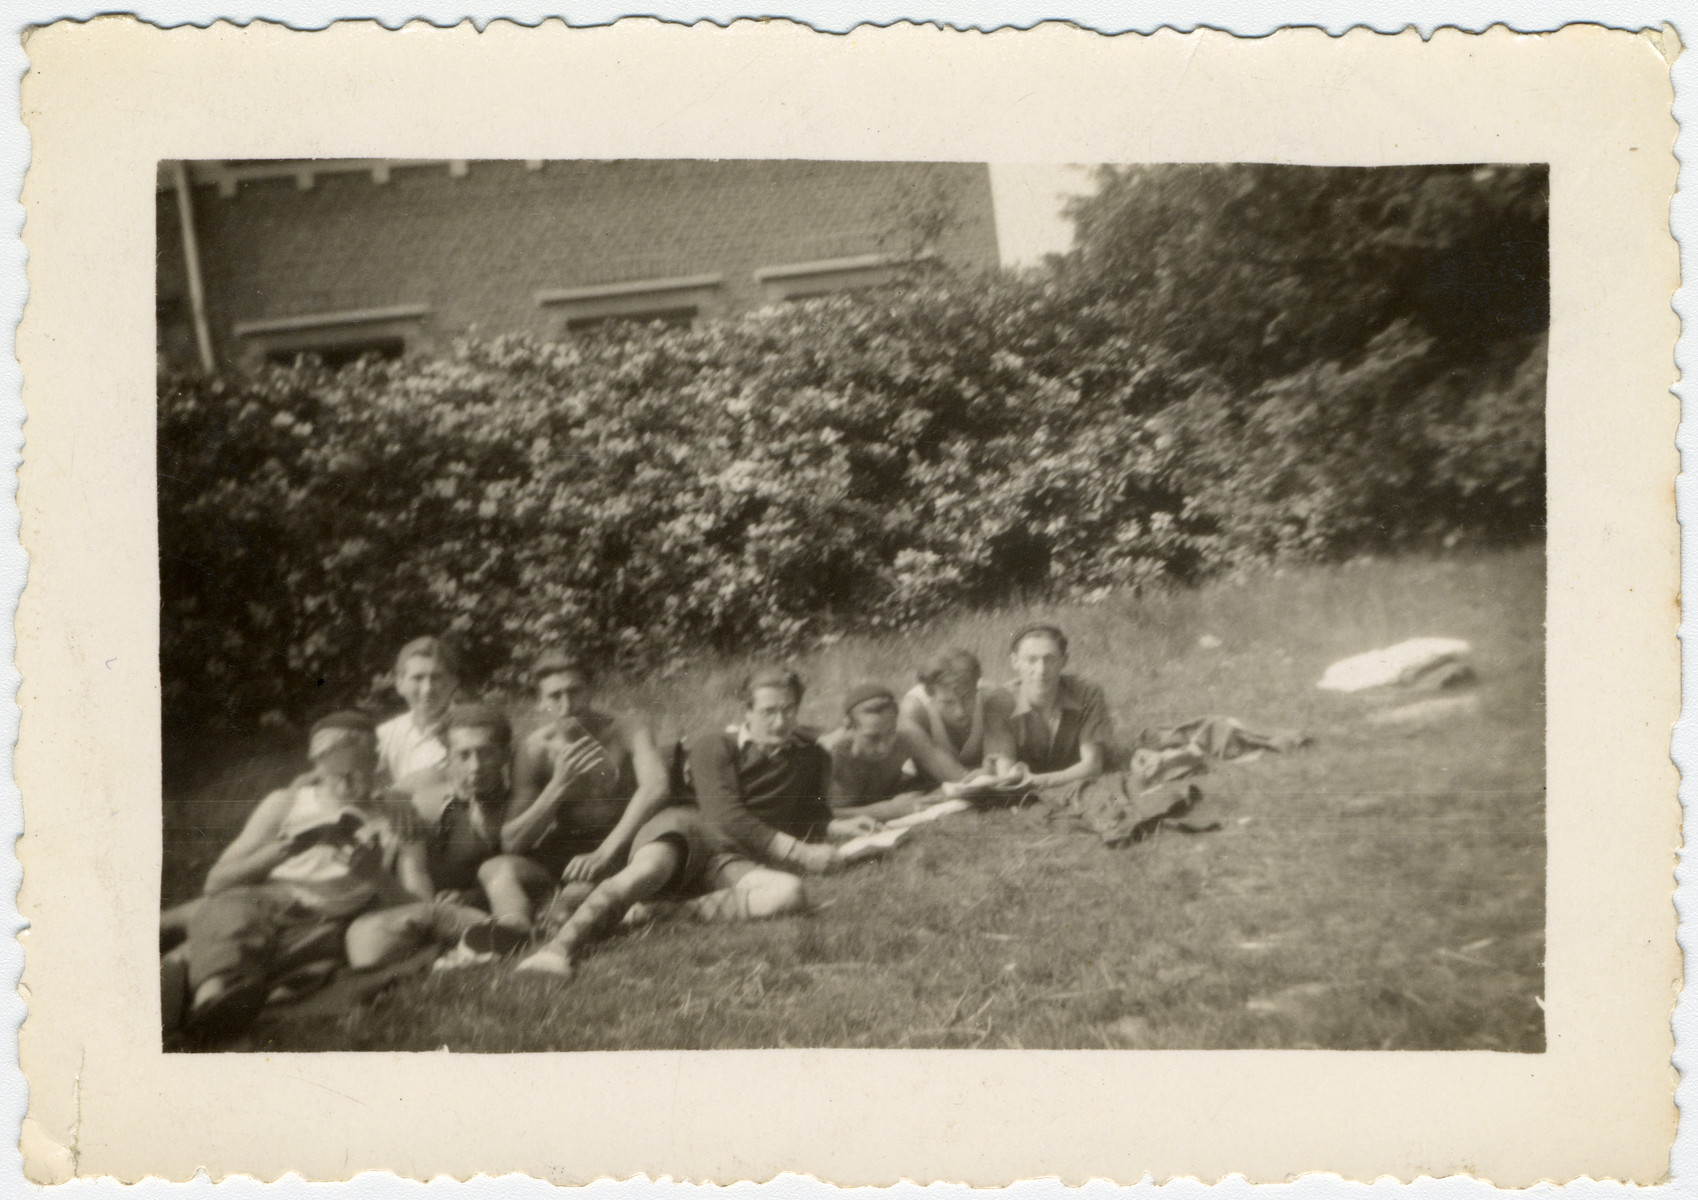 Belgian Jewish youth relax on the grounds of La Ramee, an agricultural training school.

The school was established after Jewish students were expelled from general schools  and directed by Haroun Tazieff.